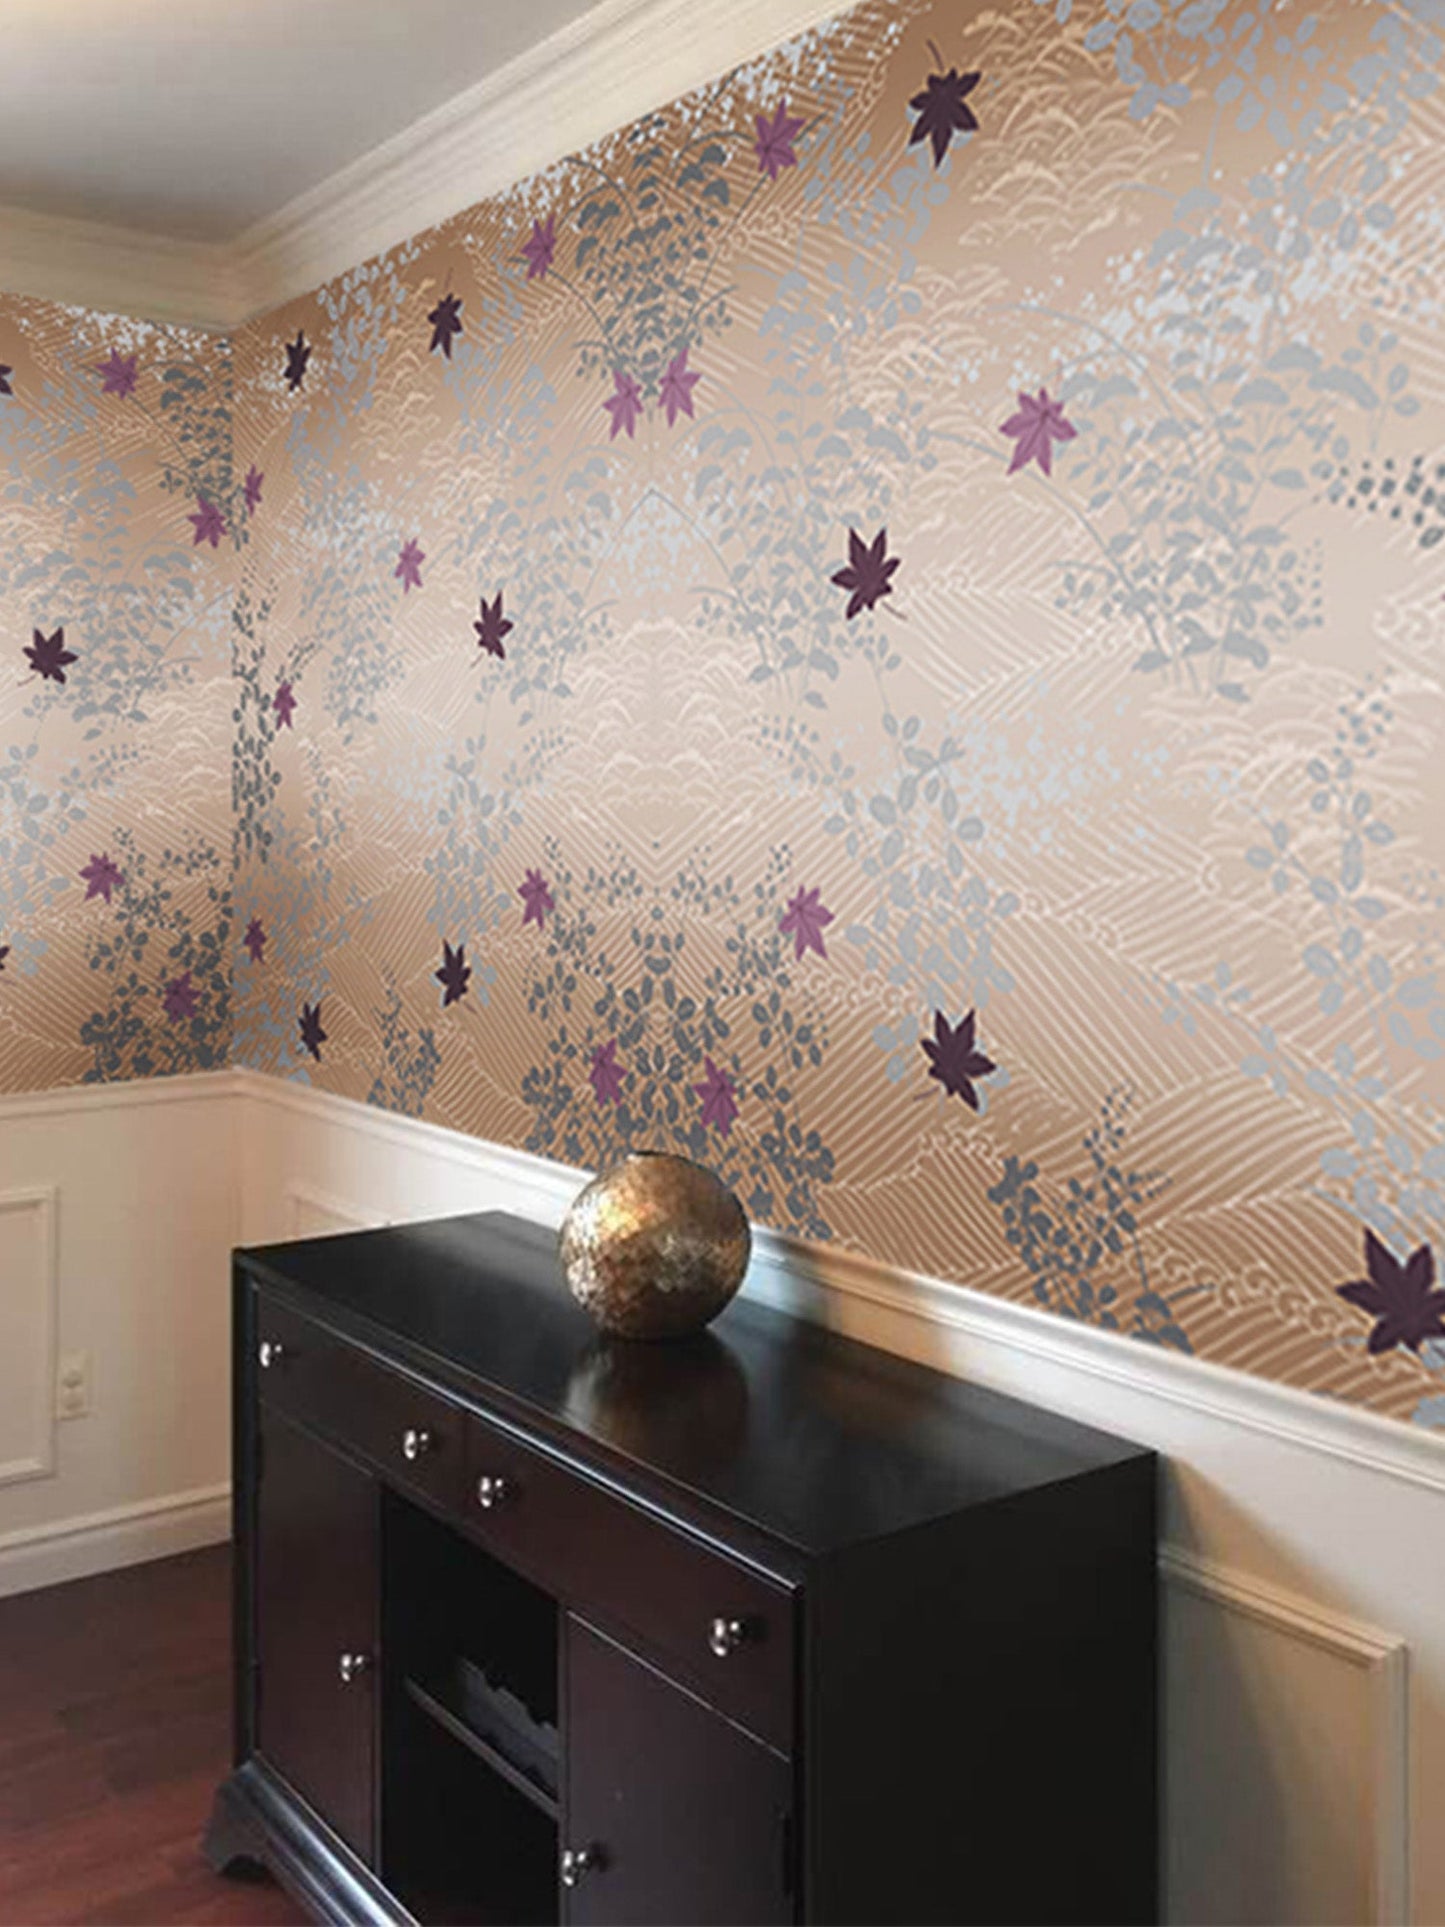 Wallpaper Non Woven/Canvas - Floating Maple Leaves